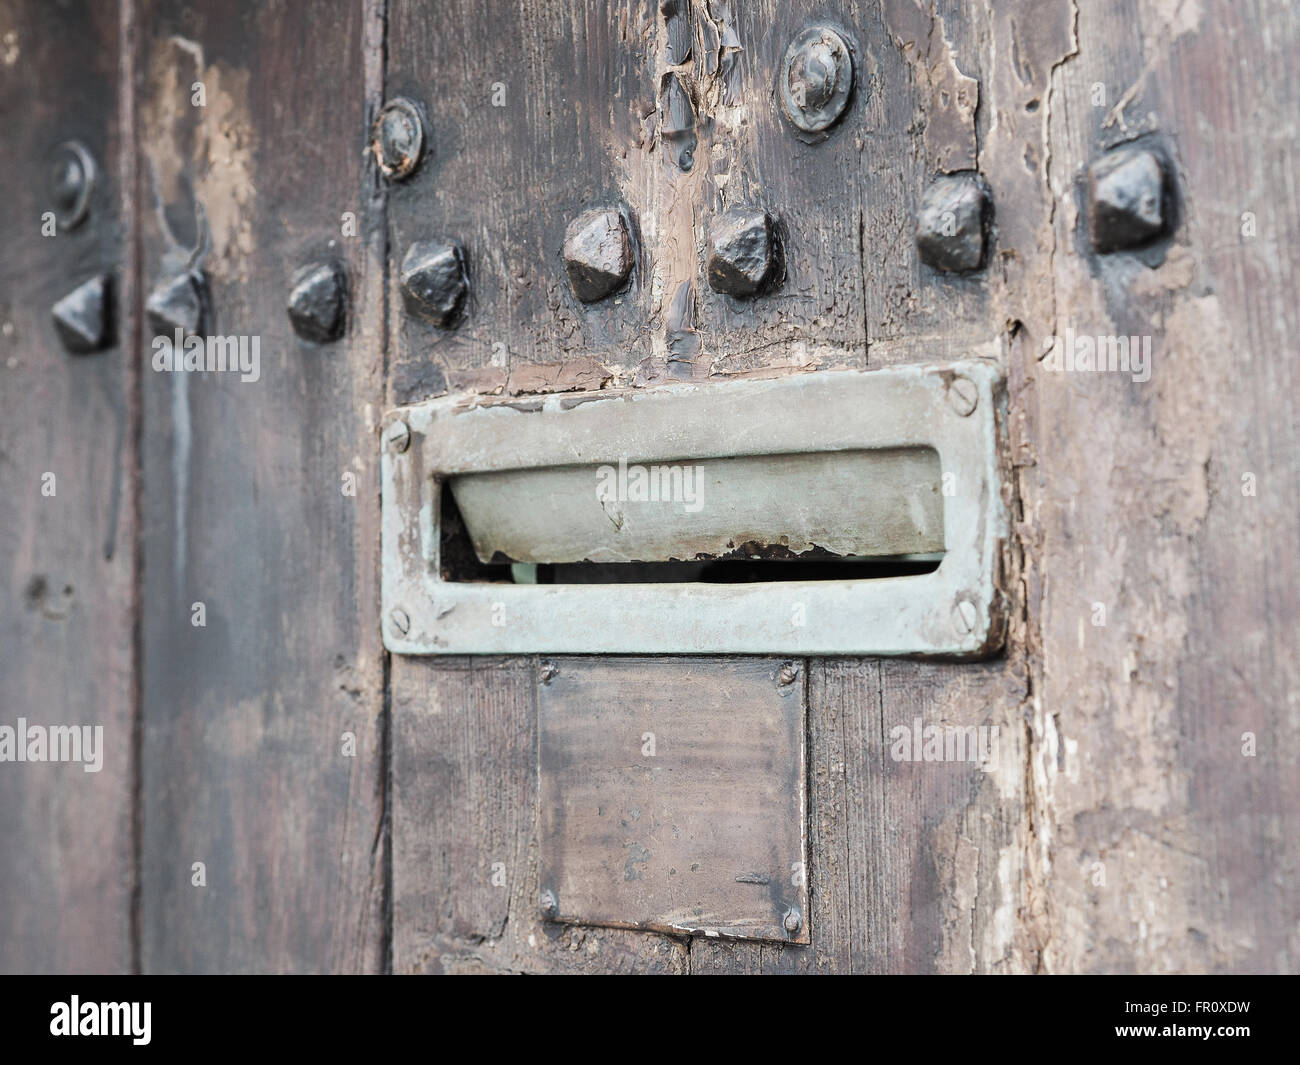 Ancient rusty iron letterbox opened on brown wooden door with metal ornaments, intentionally blurred. Stock Photo